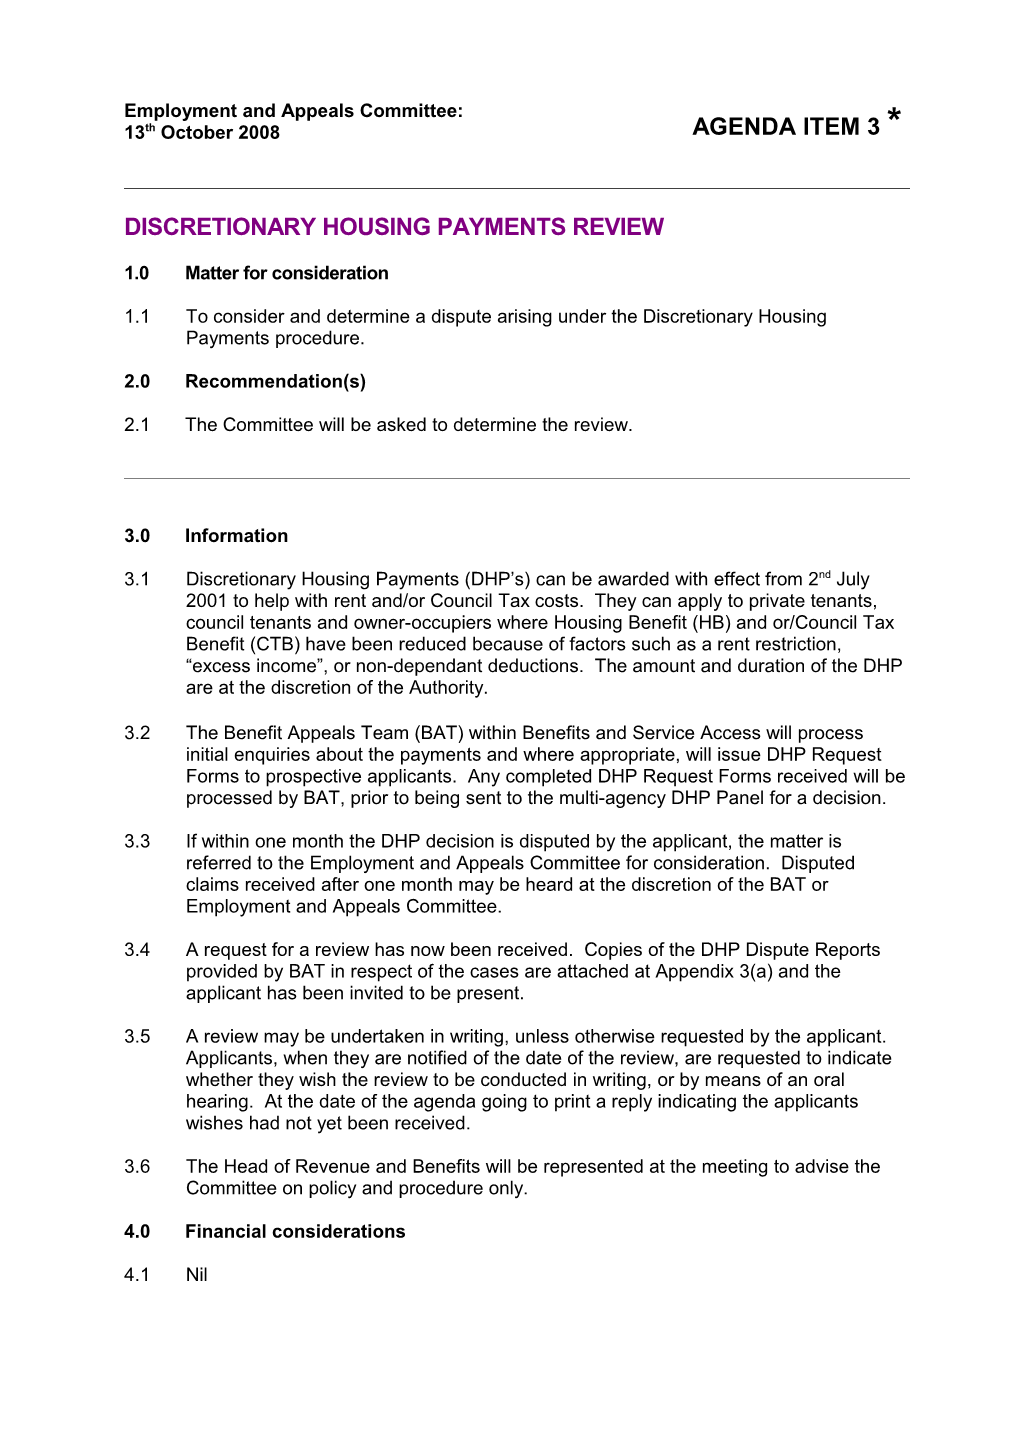 Discretionary Housing Payments Review